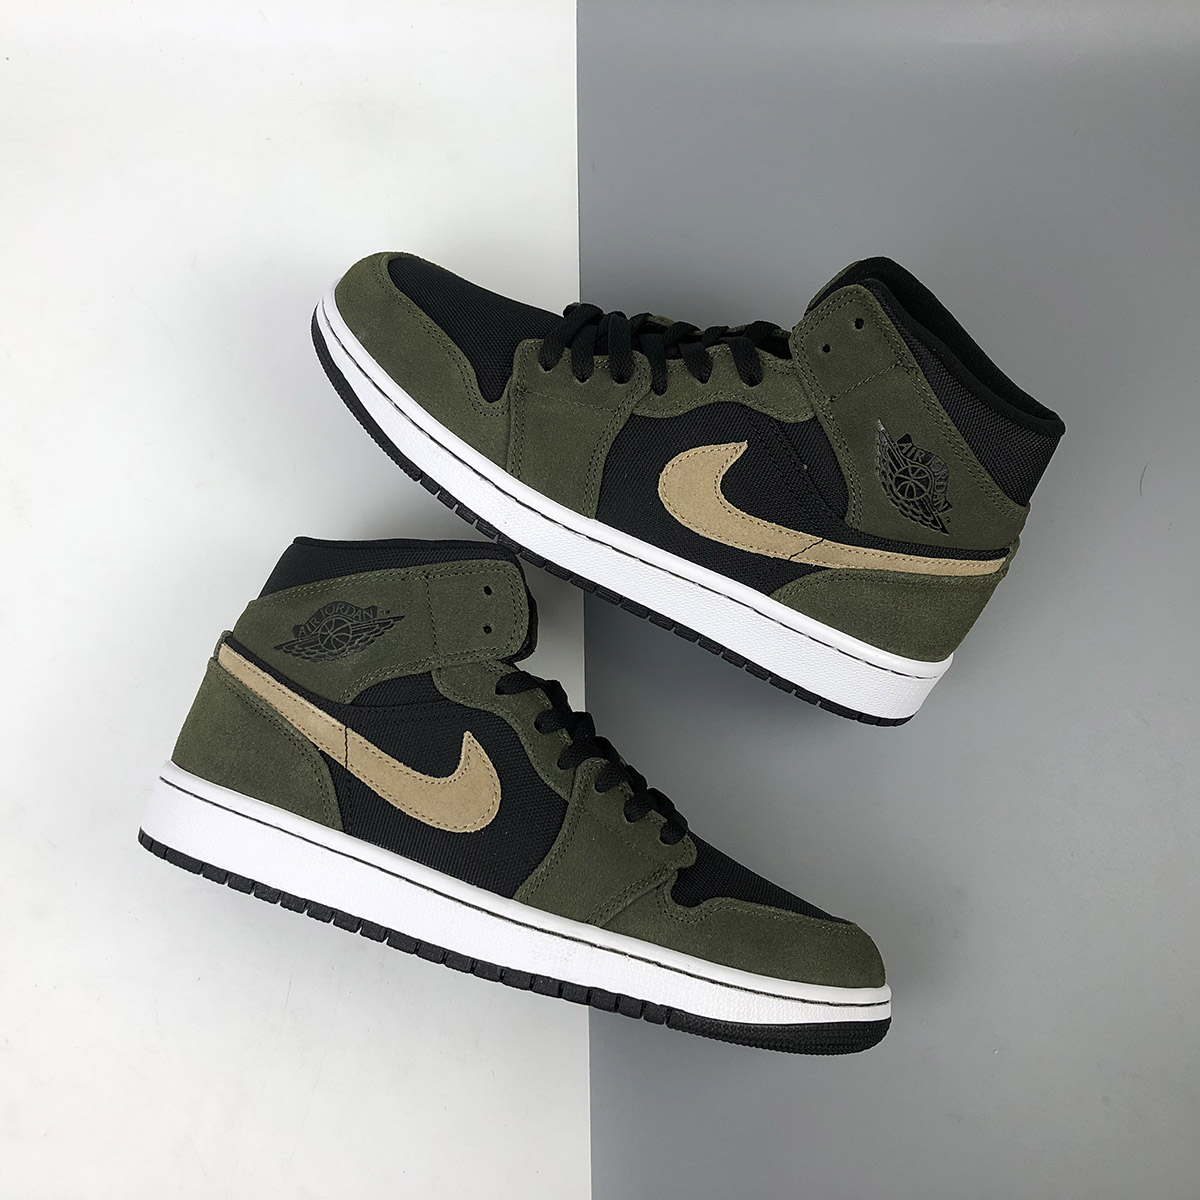 Air Jordan 1 Mid Military Olive Green For Sale – The Sole Line